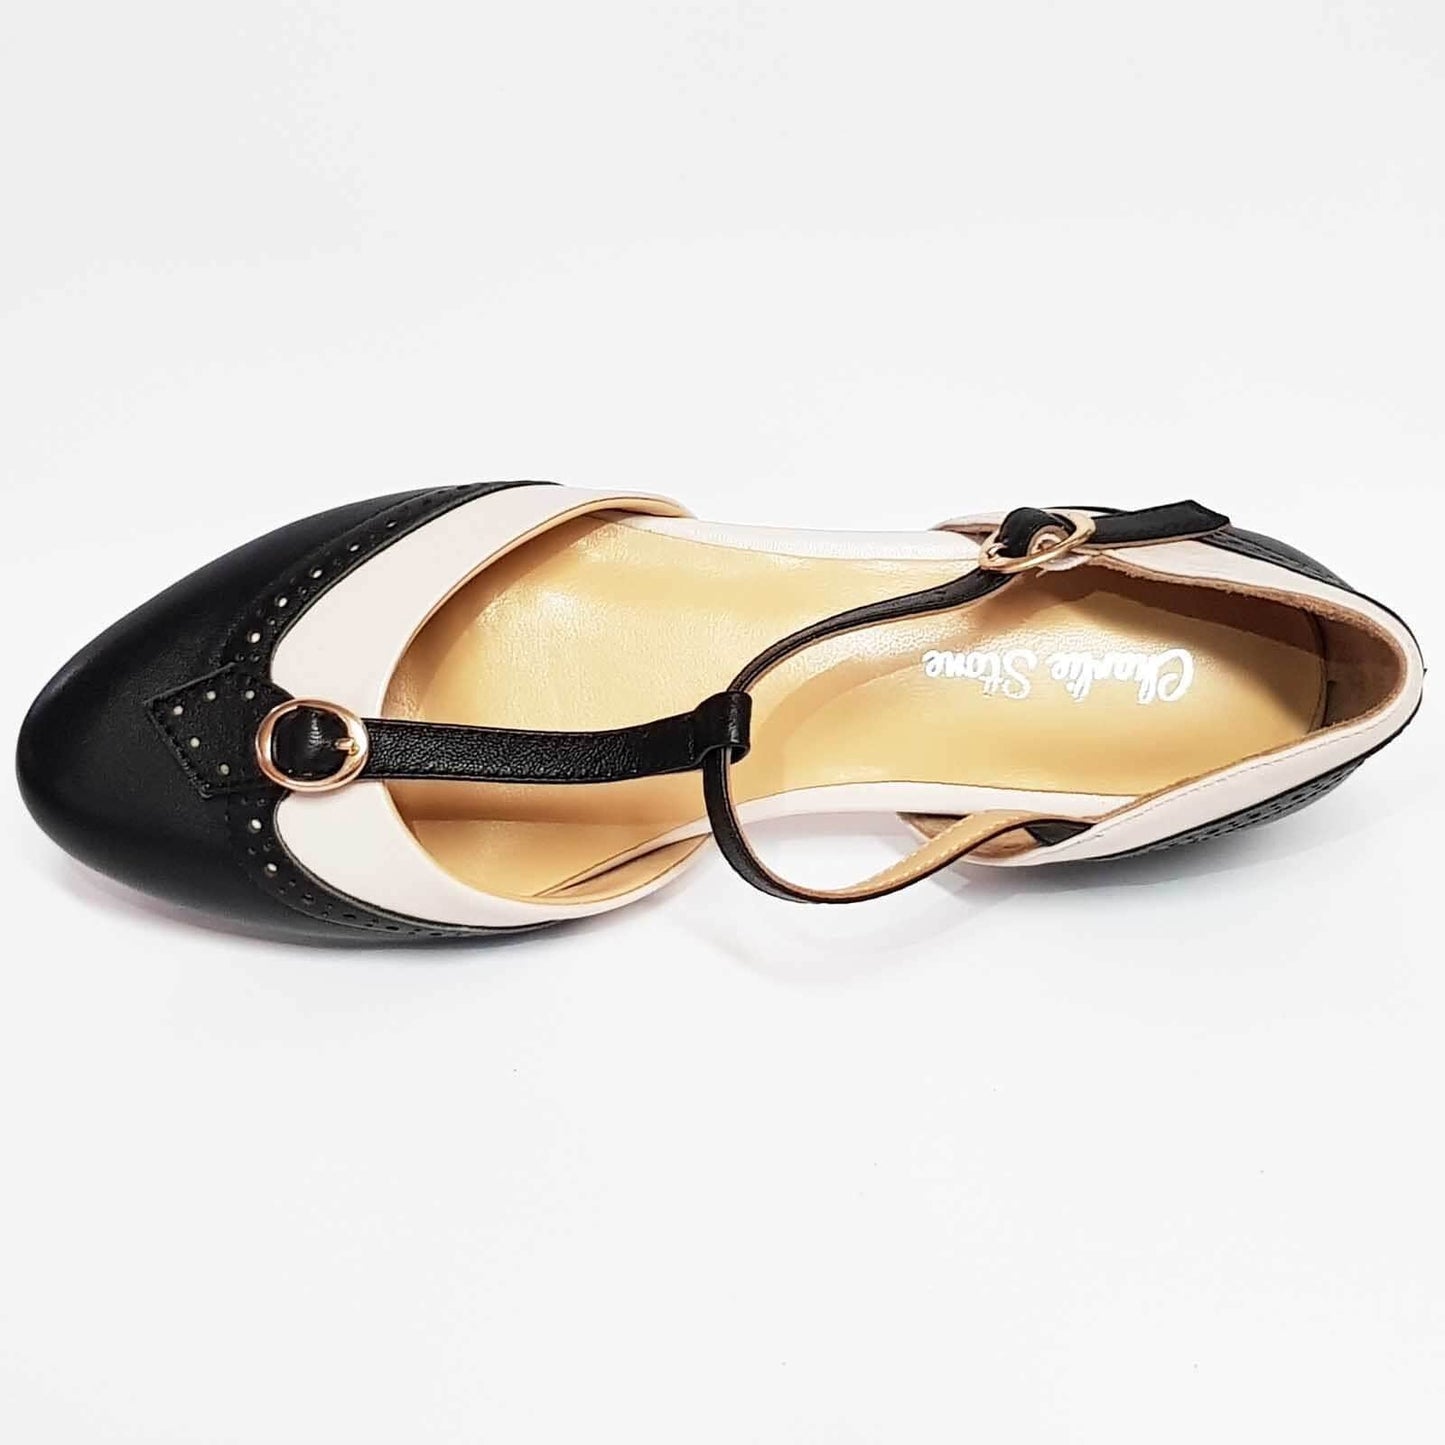 Image of Charlie Stone Parisienne Shoes - Black/Ivory